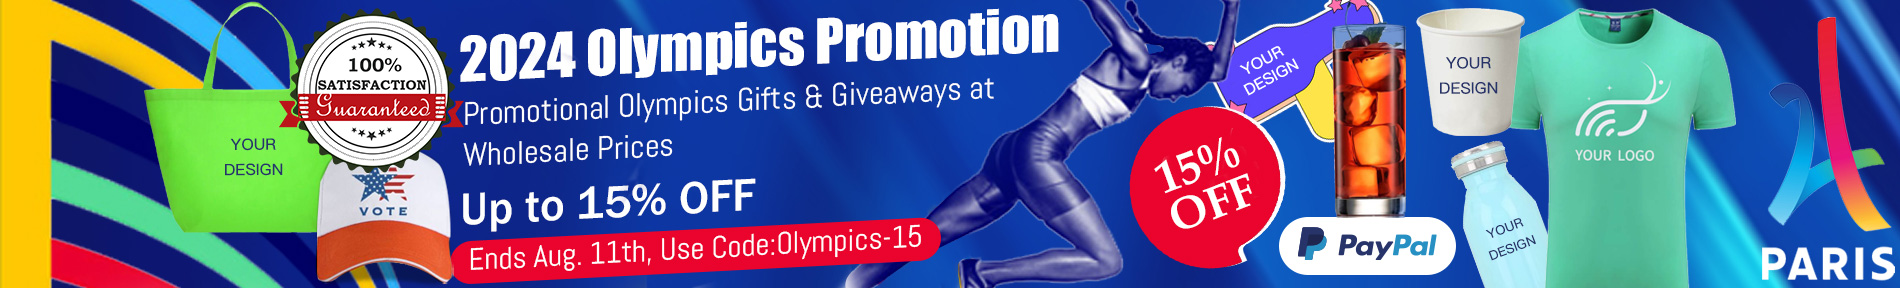 Wholesale Custom Promotional Gifts Ideas For Olympic | Decentcustom.com